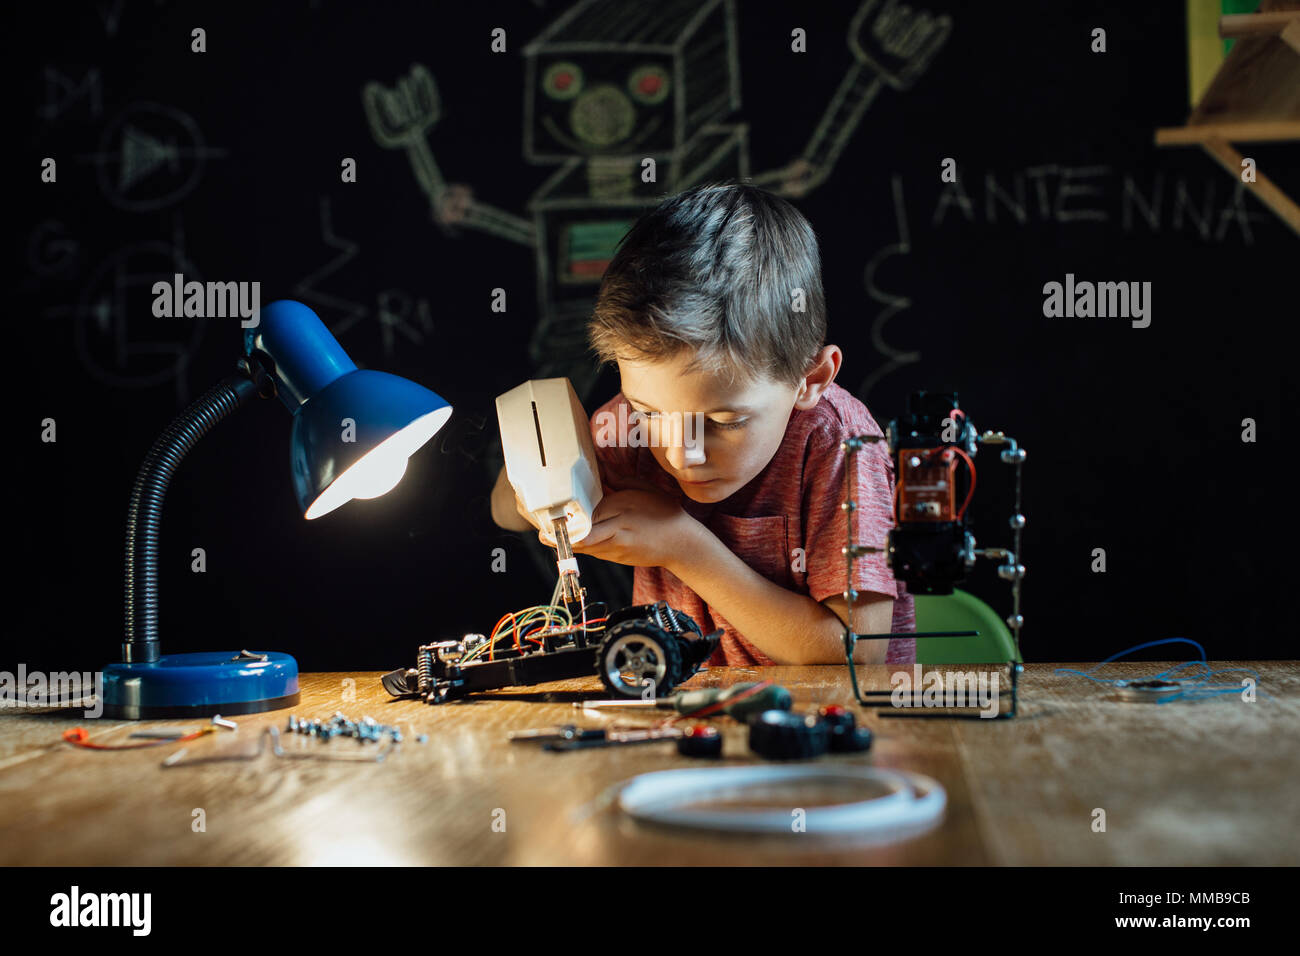 Portrait of a smart schoolboy soldering in the evening at home. Child with a soldering gun working on his school project. Stock Photo